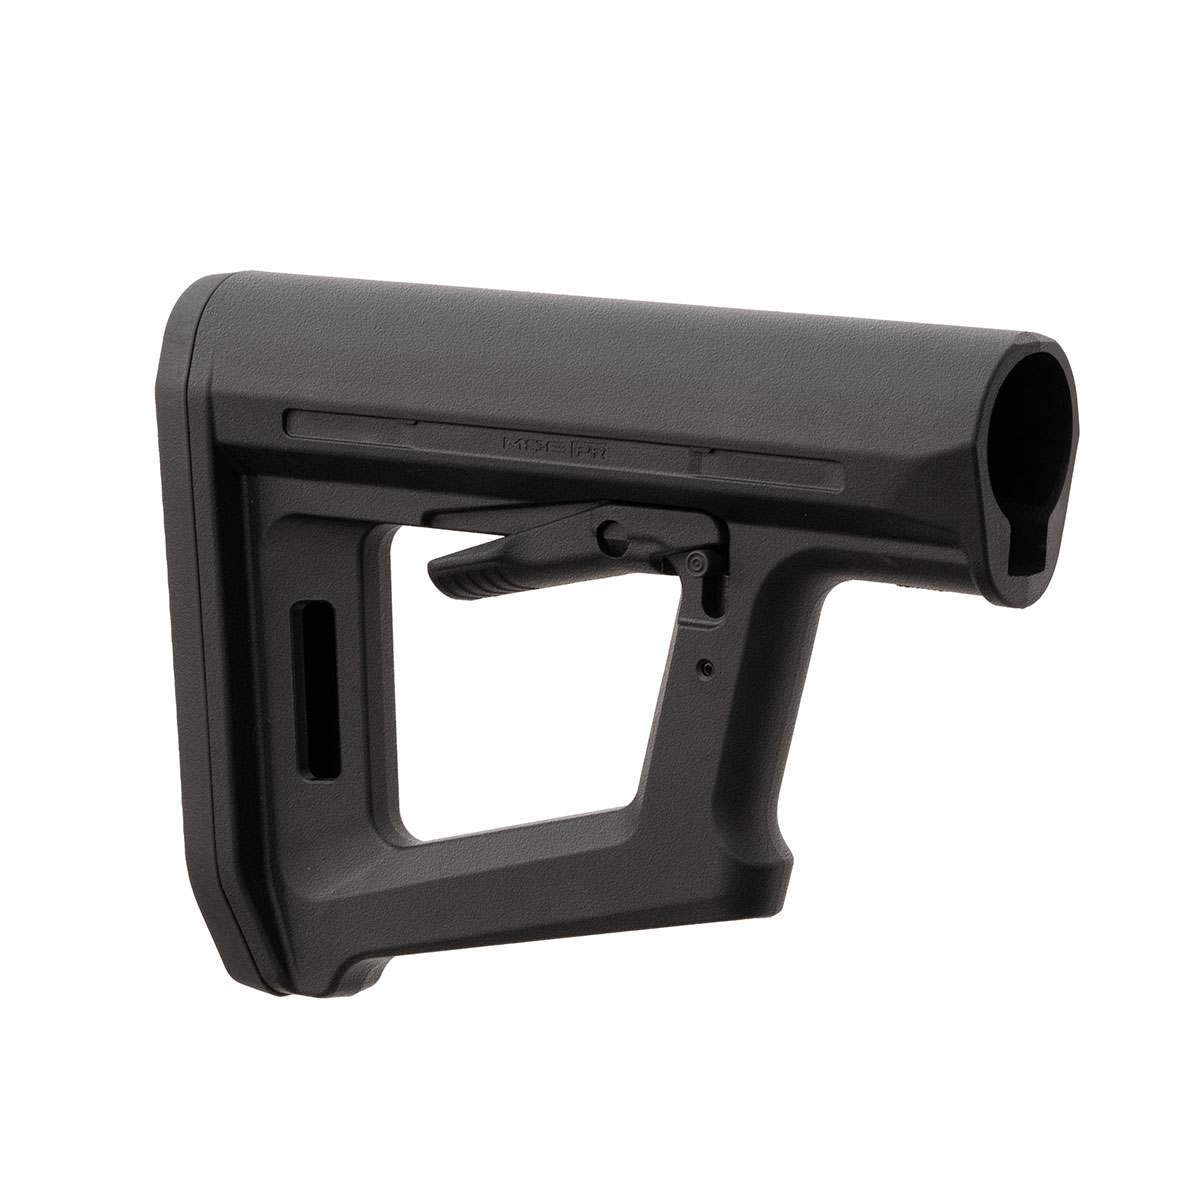 MAGPUL - MOE® PR COLLAPSIBLE MIL-SPEC CARBINE STOCK FOR AR-15